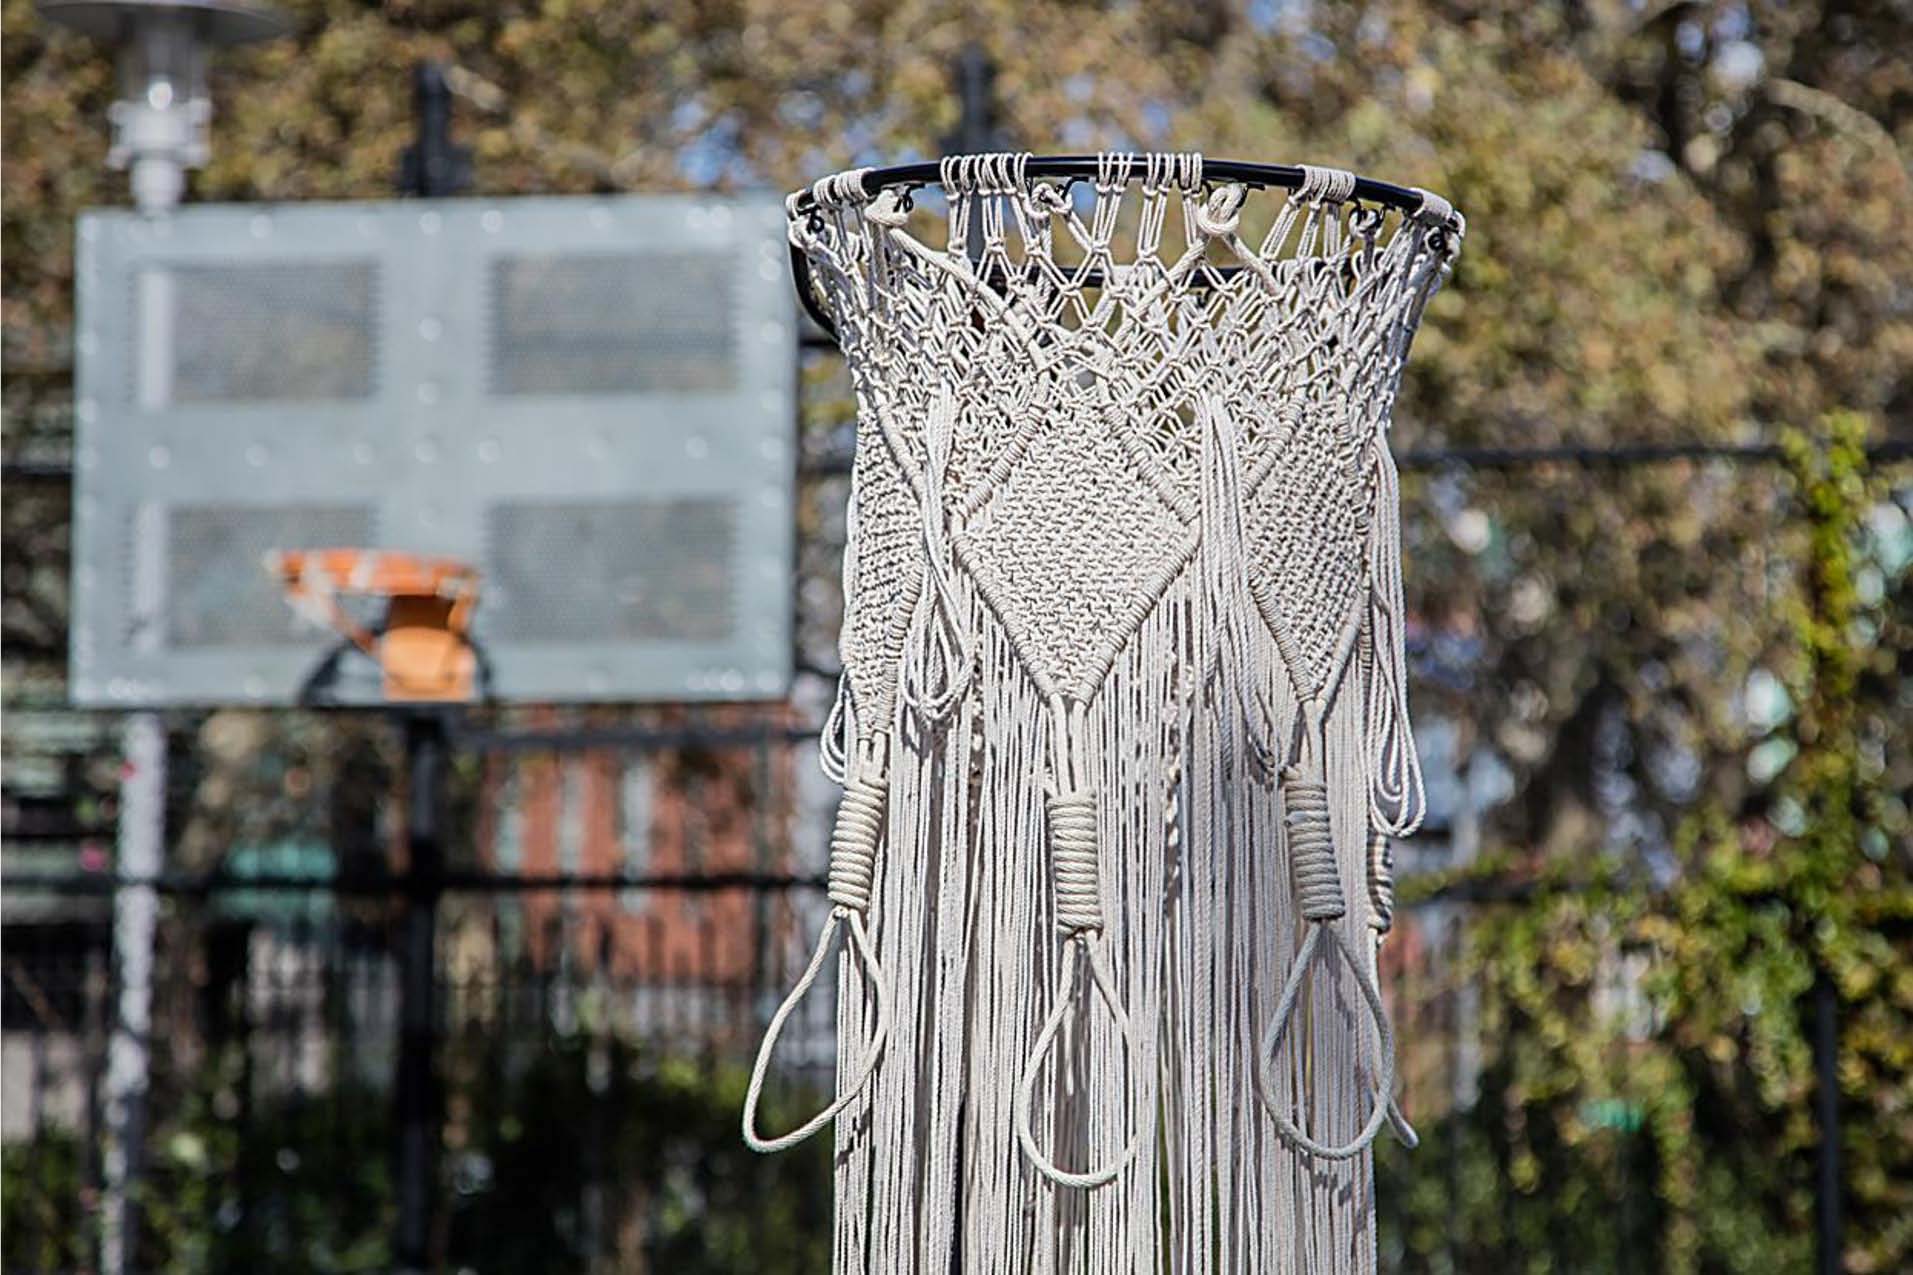 Photograph of the rim of a baskeball hoop with a macrame net hanging off of it.